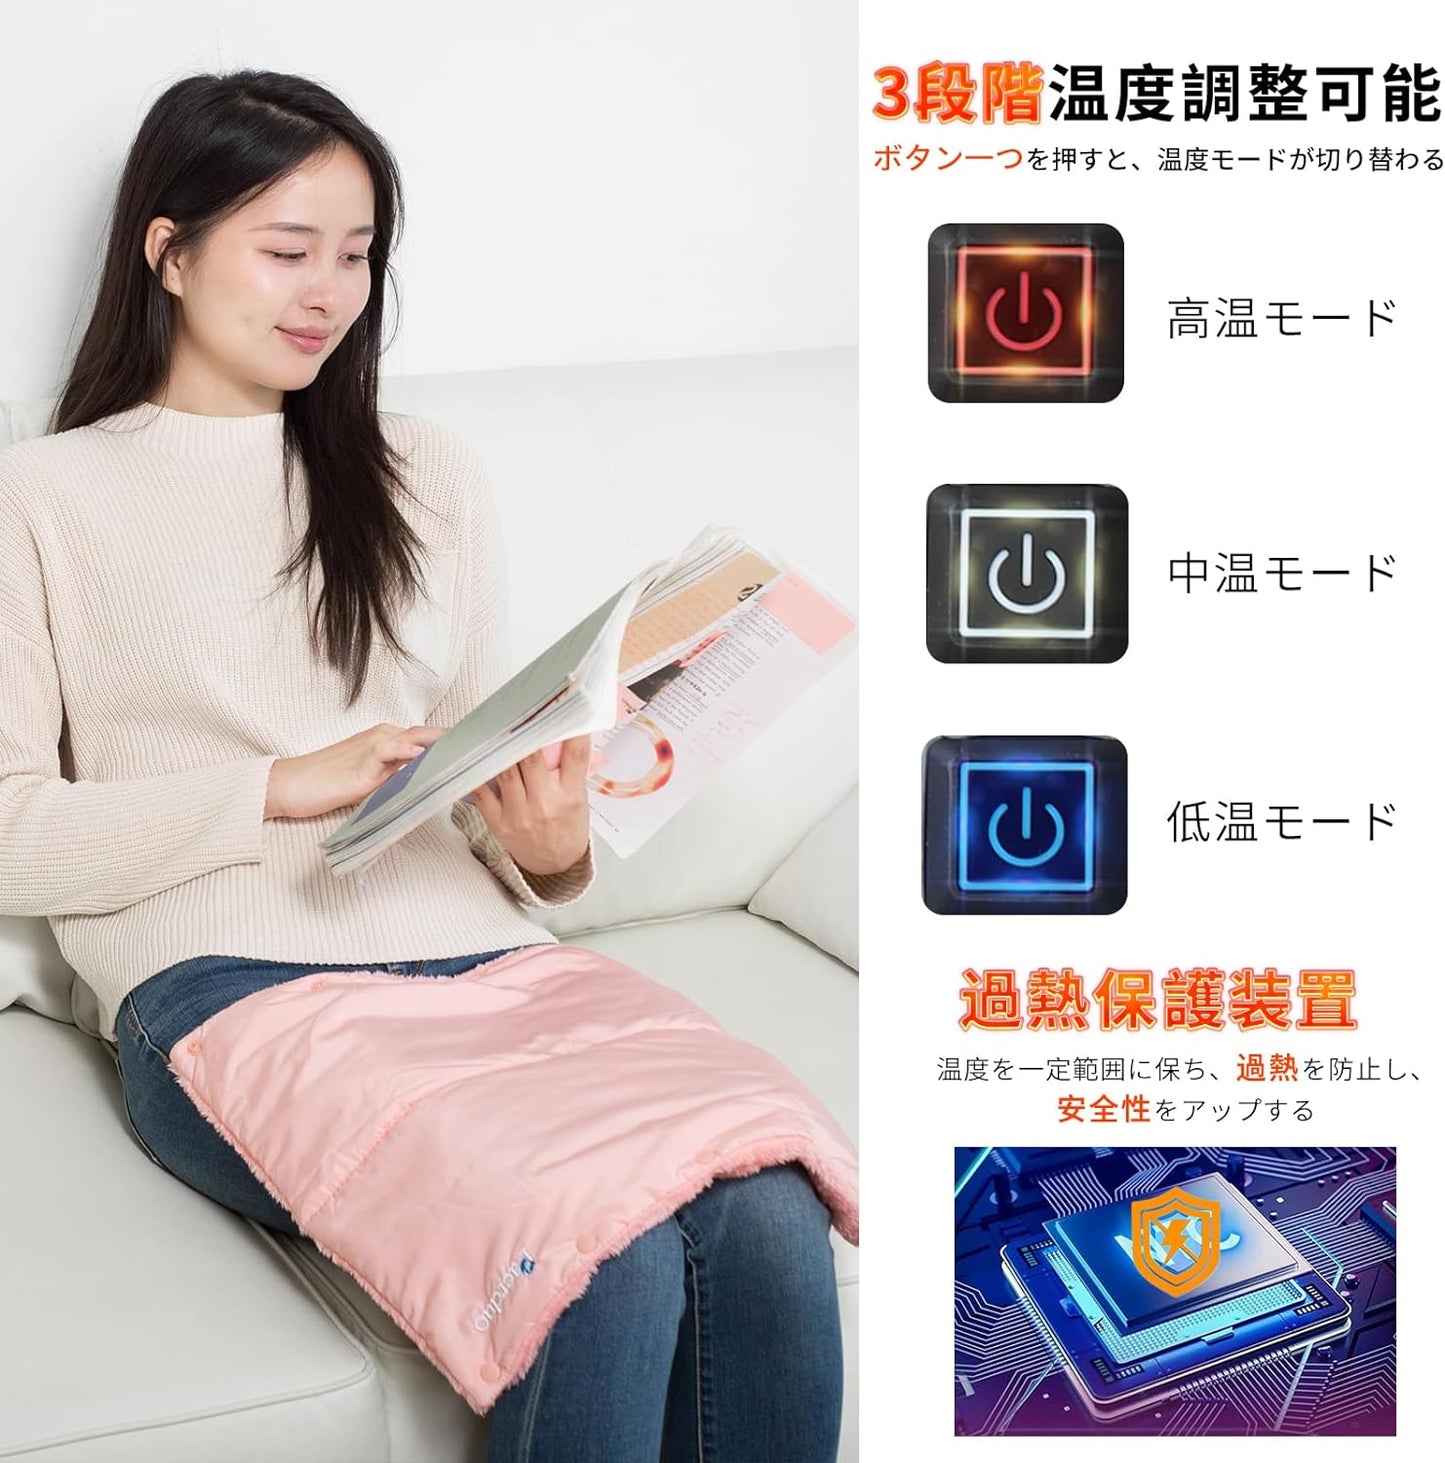 Paerduo Newest 7-Way Hot Mat, USB 10 Seconds Warm, Hot Carpet, Mini, 17.7 x 15.7 inches (45 x 40 cm), 3 Temperature Adjustment, Electric Carpet, Snap Connection, Free Size, Electric Mat, Thick, Lightweight, Japanese Heater, Washable, Suitable for Hands, L